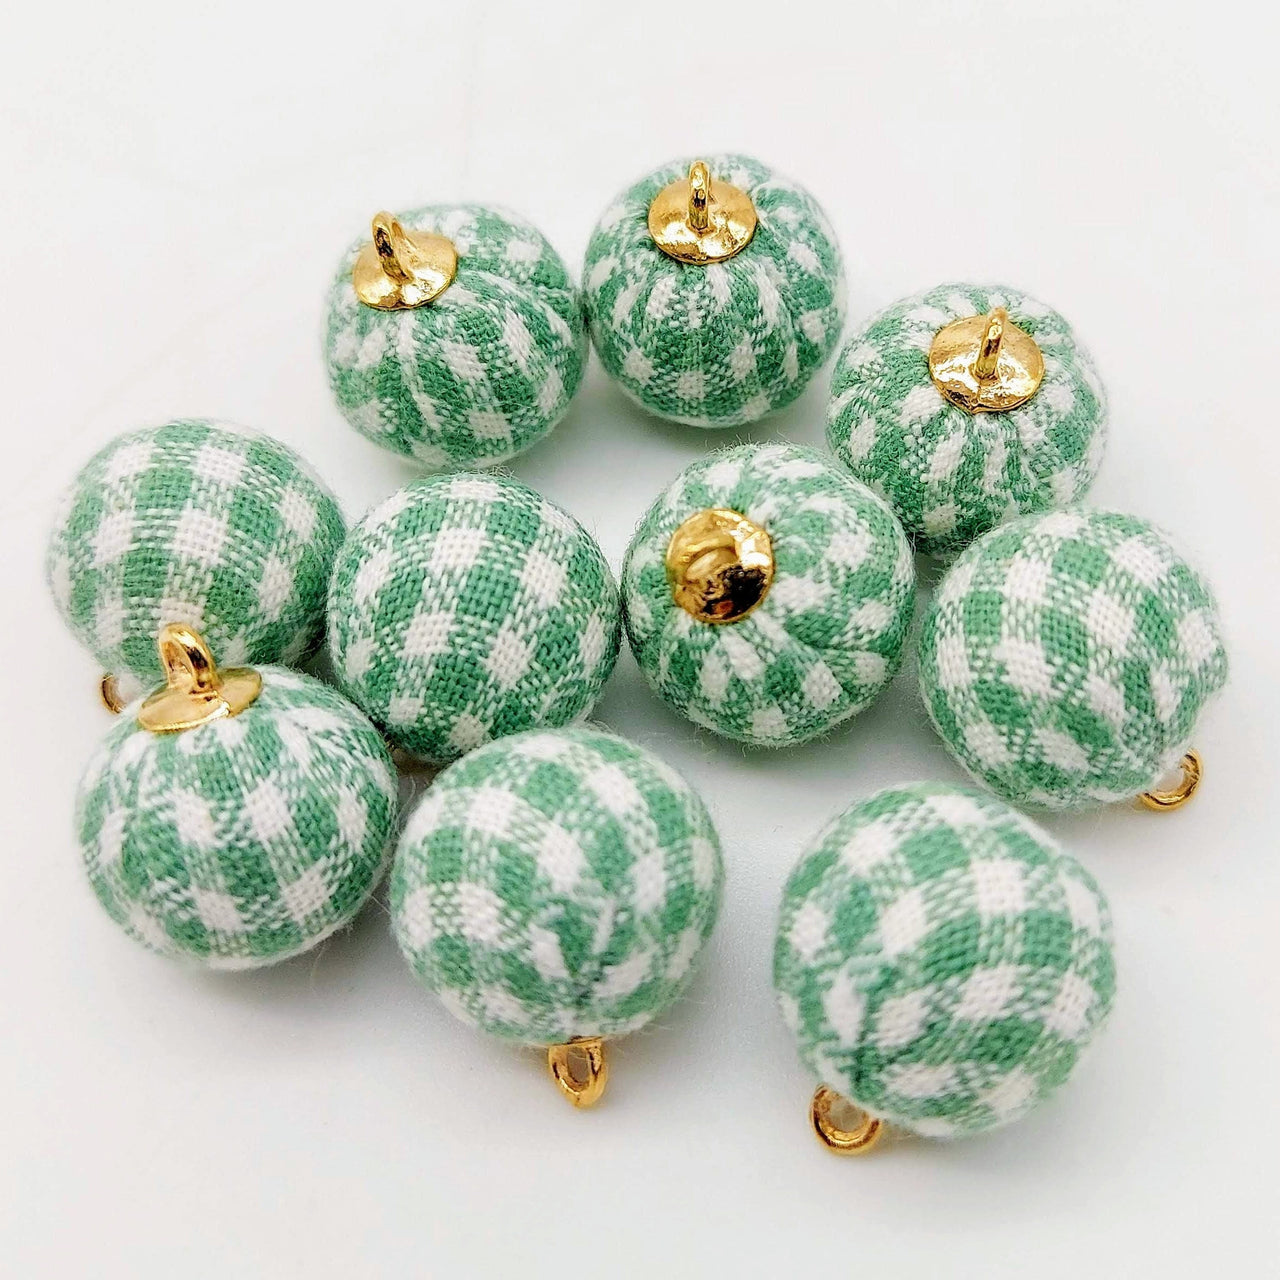 Green and White Checkered Cotton Small Fabric Balls Tassel, Button with Ring Cap, Decorative Tassels